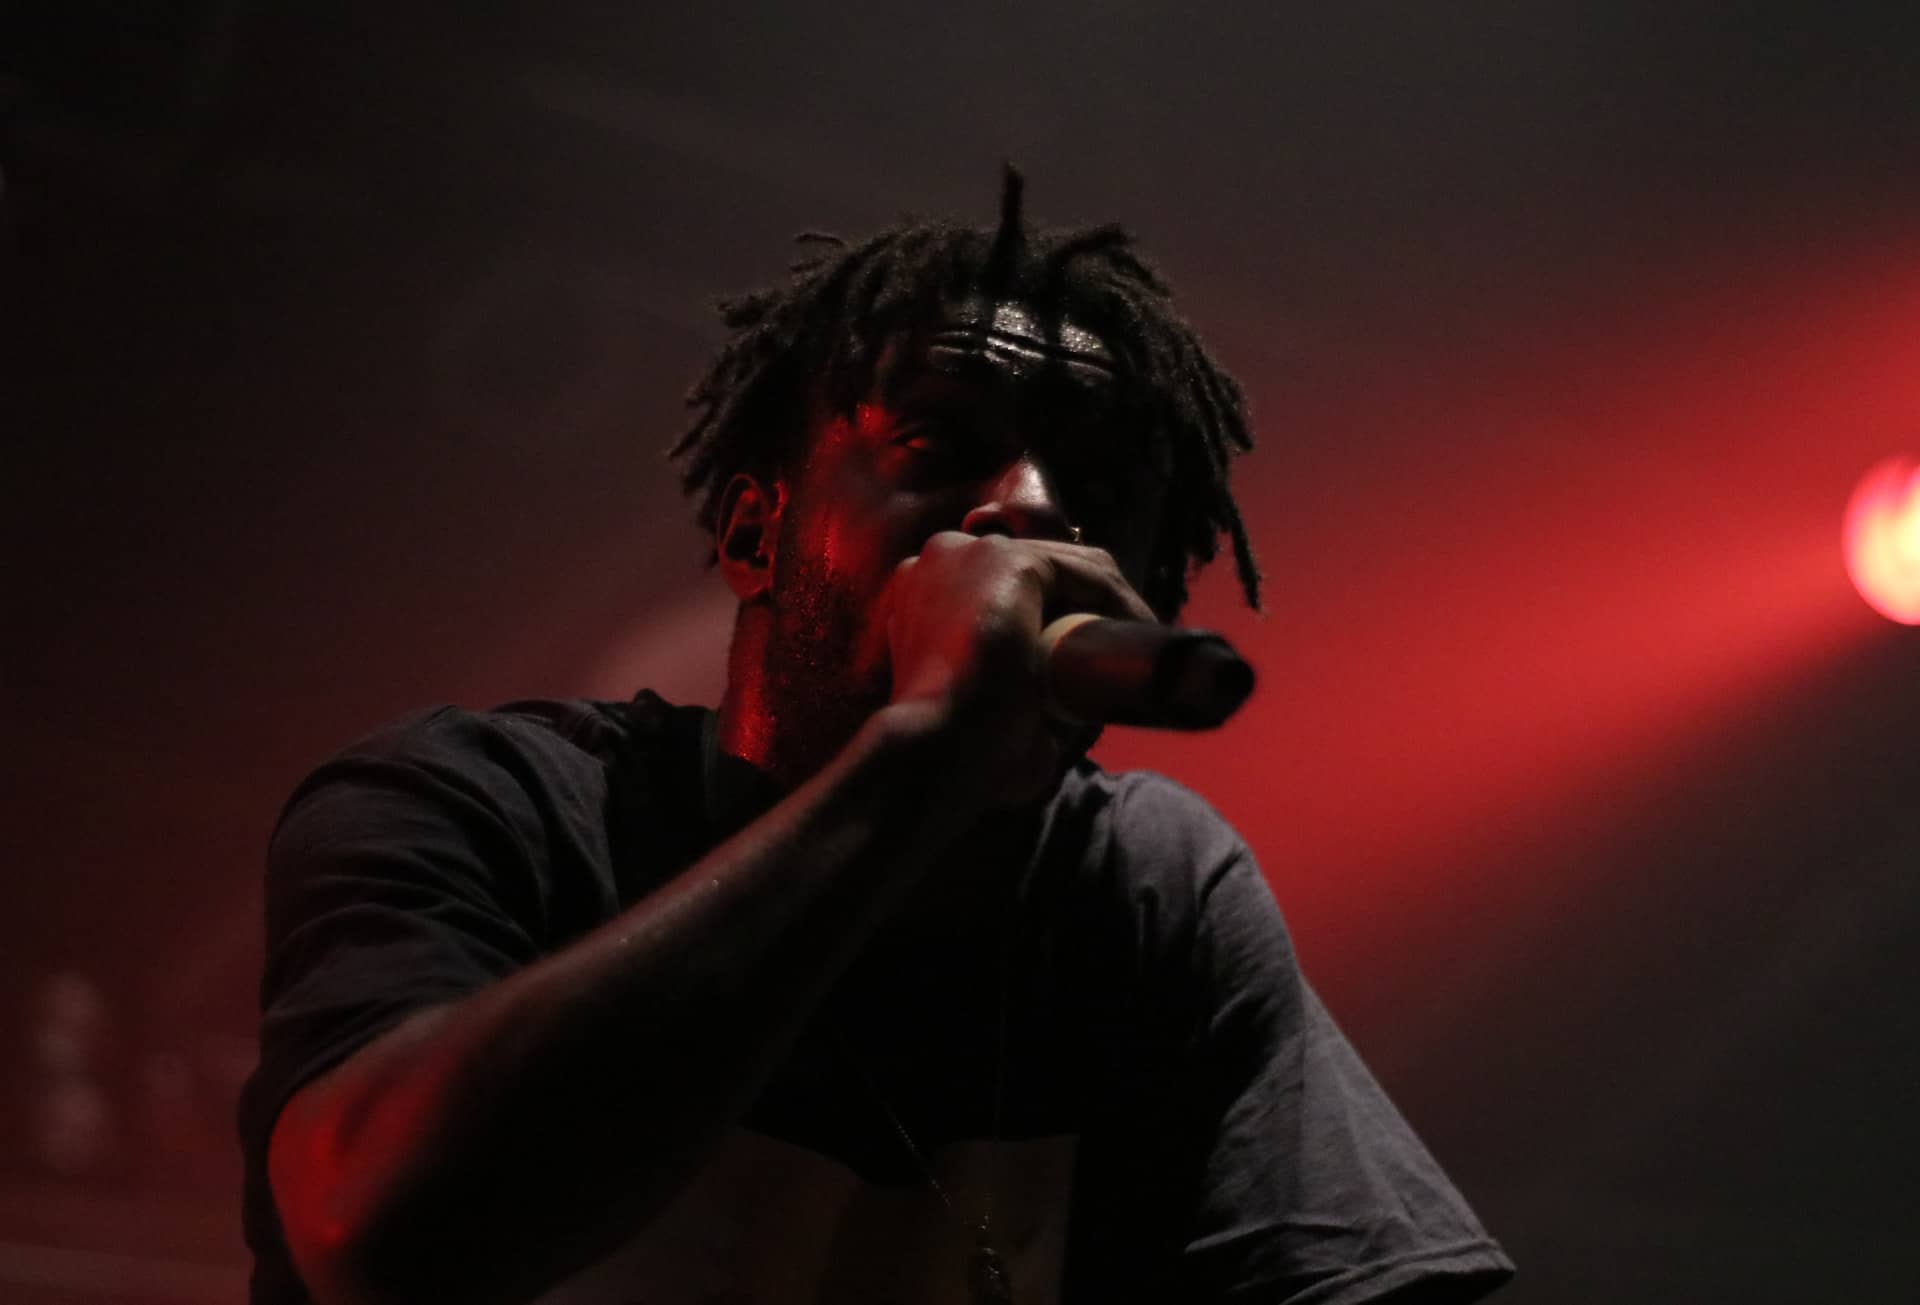 Rapper performing live with red background